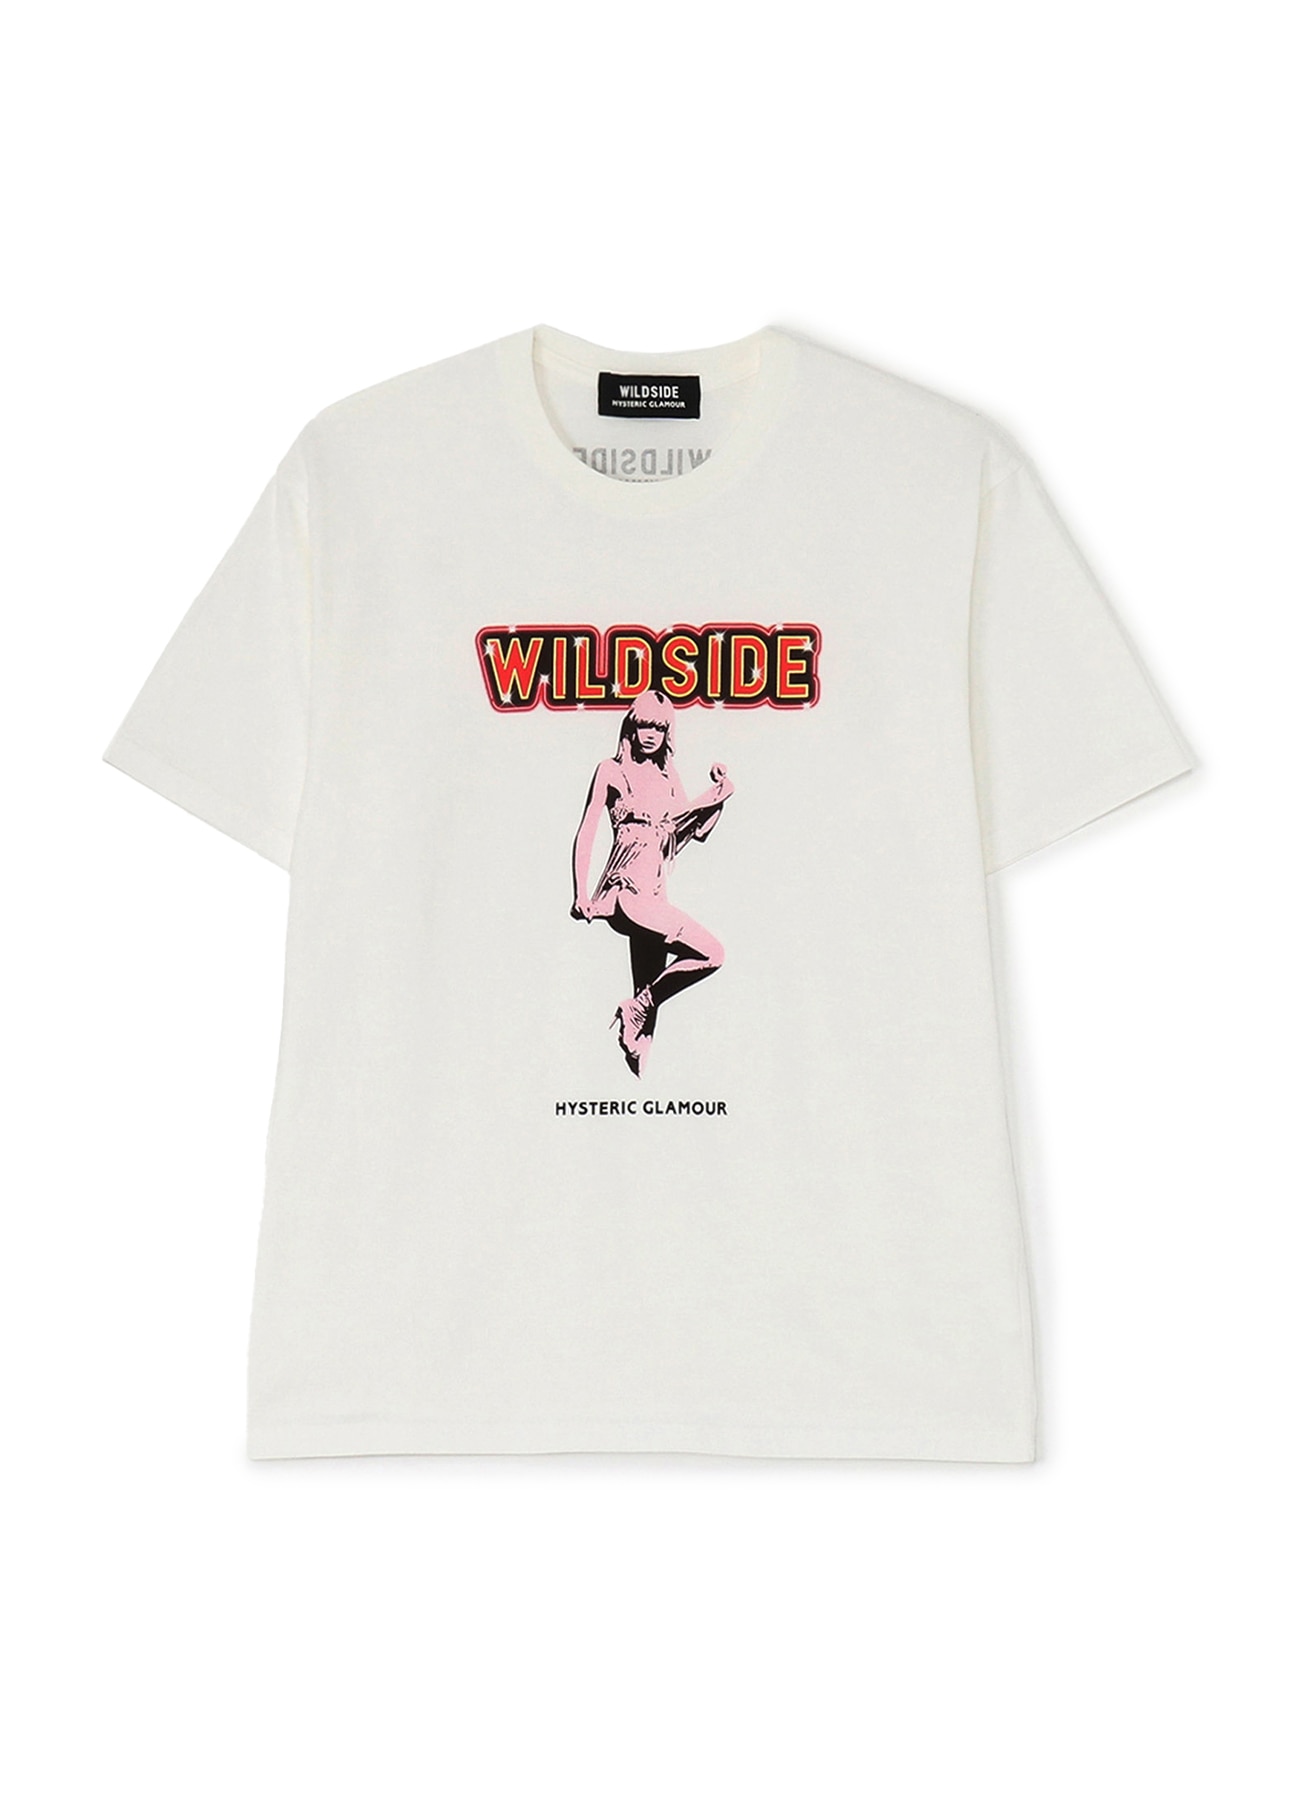 WILDSIDE x HYSTERIC GLAMOUR &quot;GOODNIGHT LADIES&quot; T-shirt